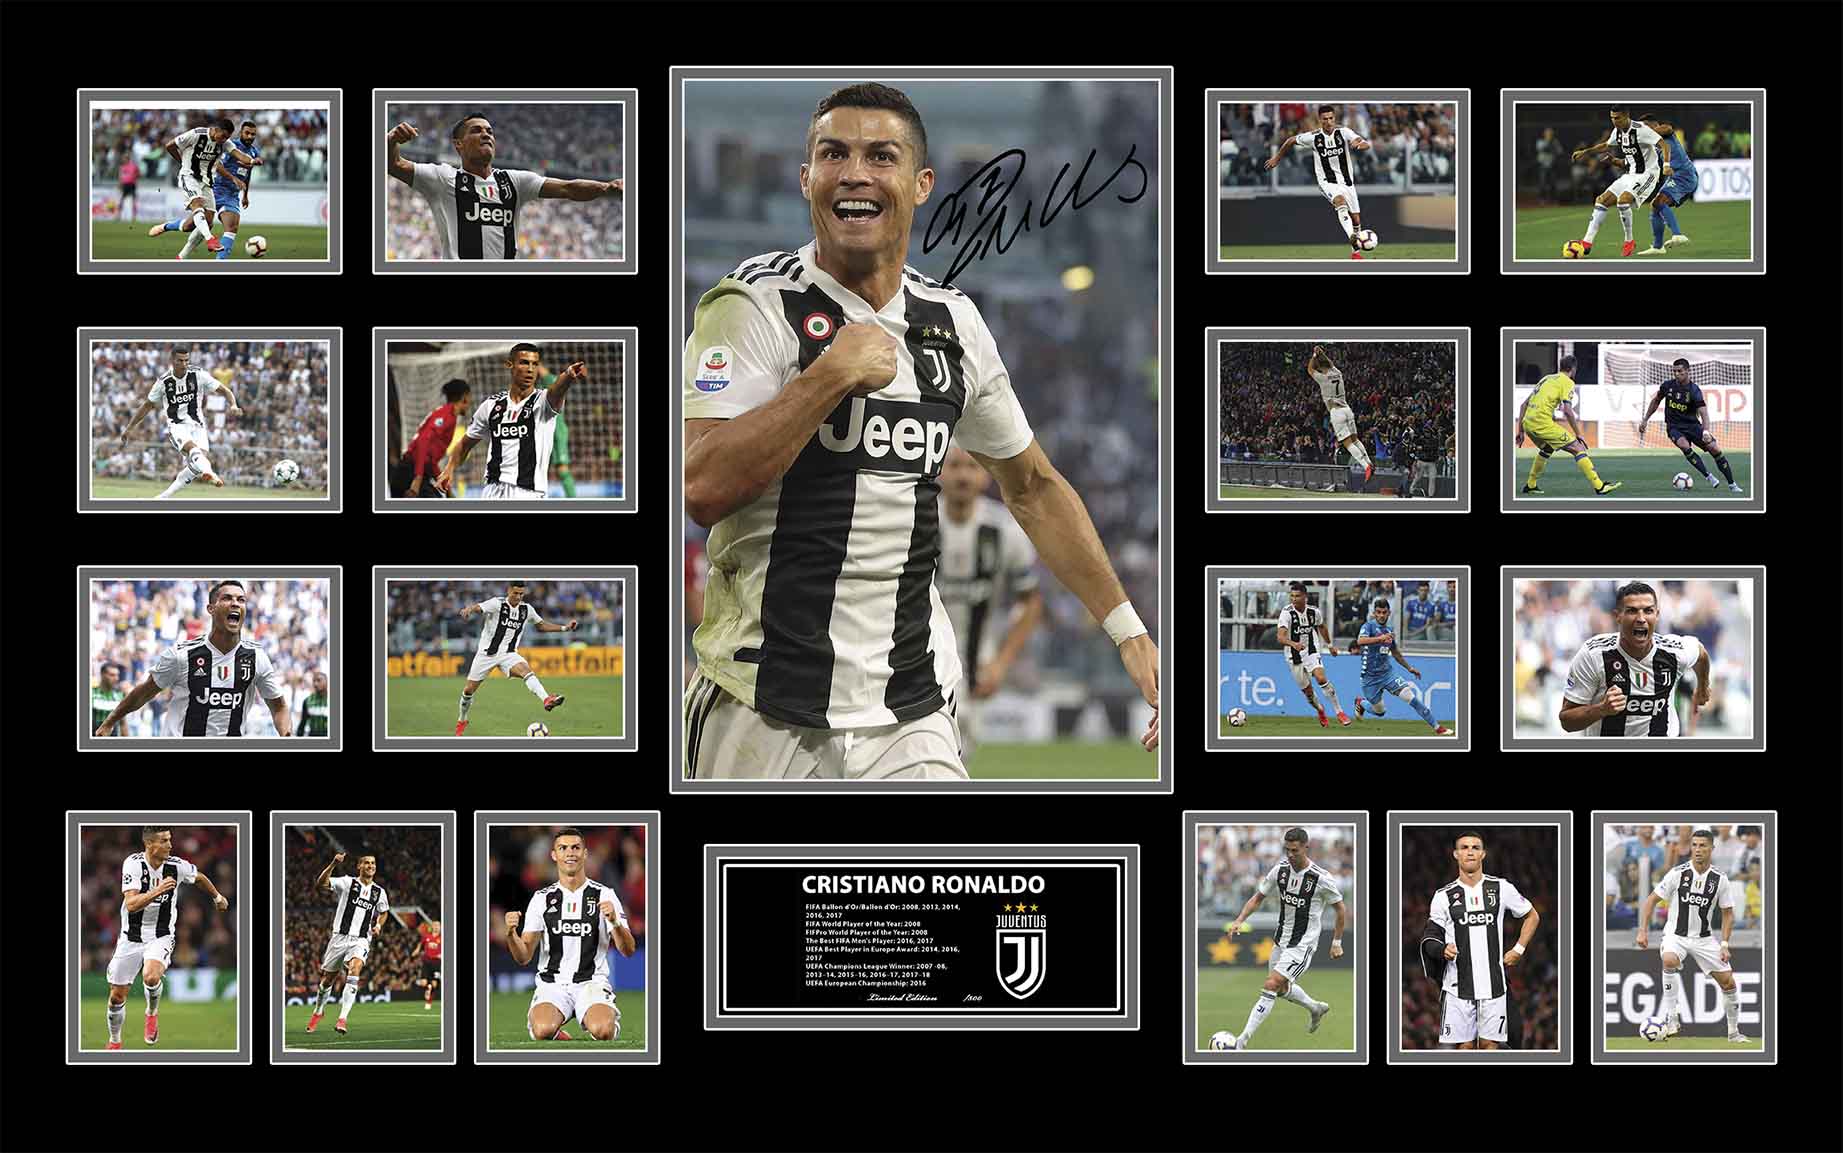 Cristiano Ronaldo Large Collage Framed - KING CAVE